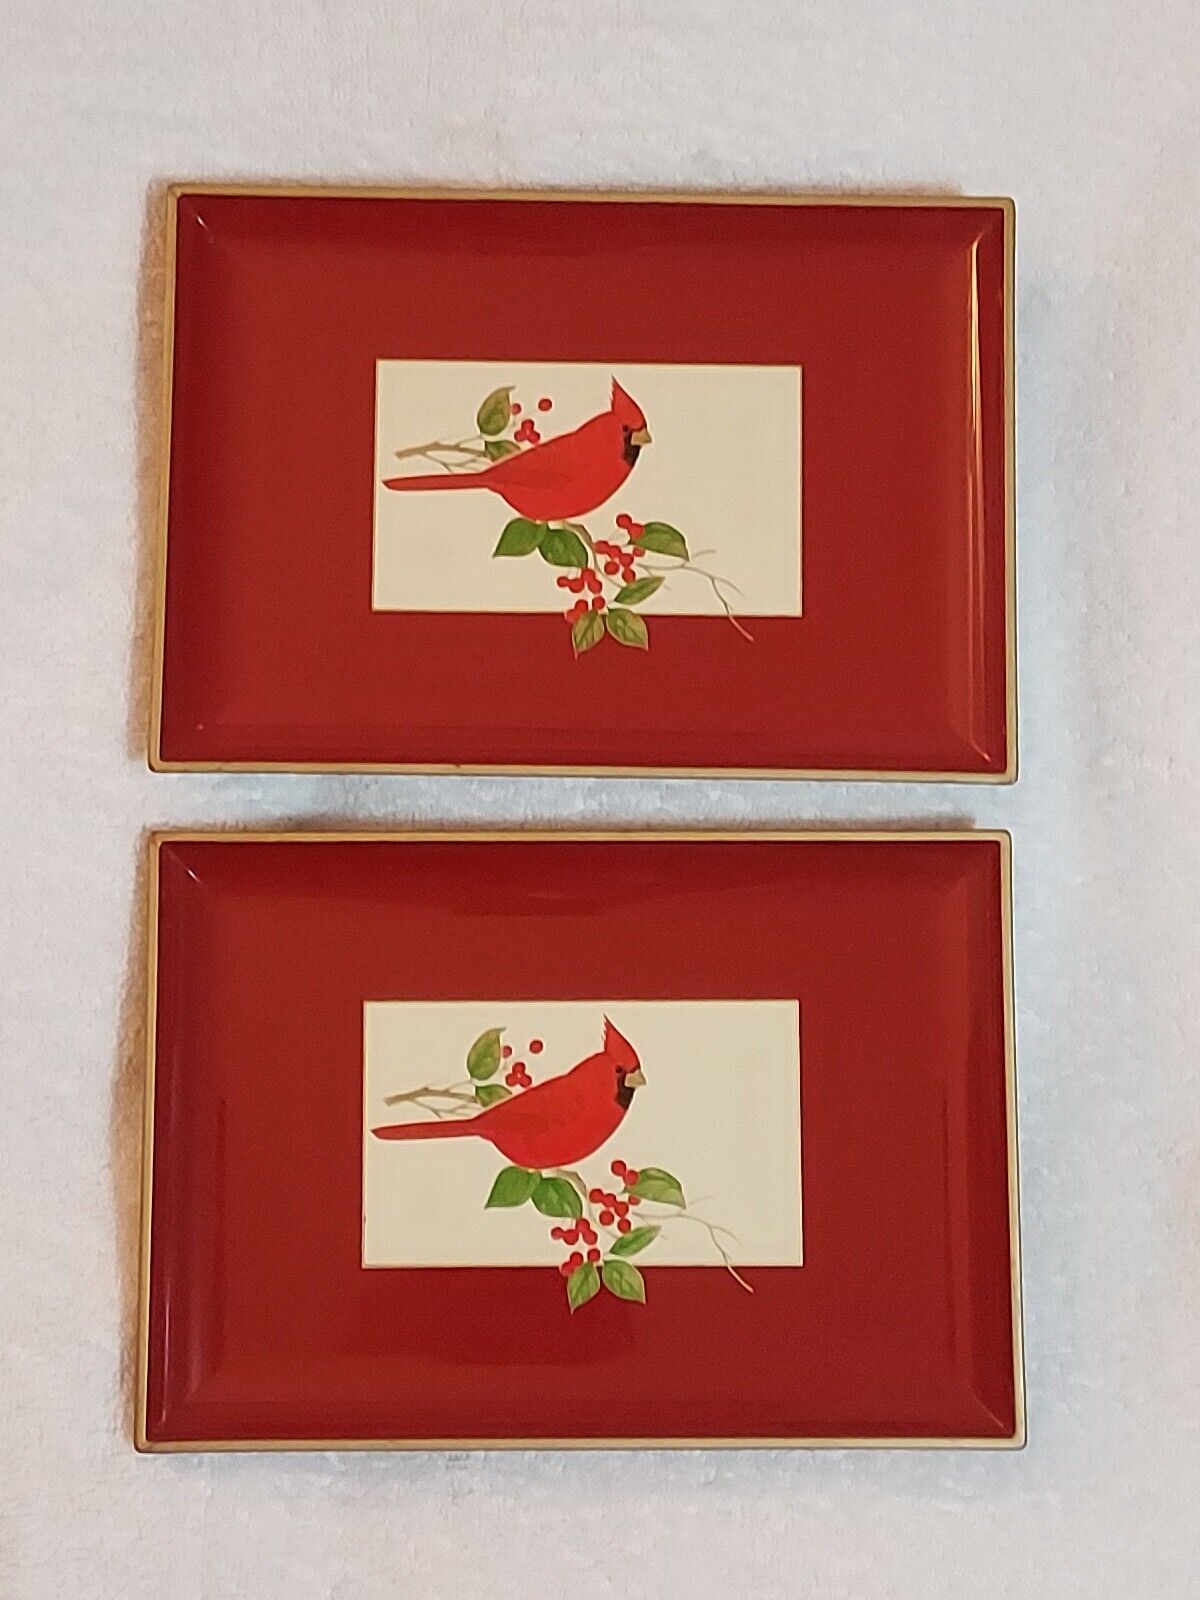 2 Otagiri tray Cardinal with berry branch Lacquerware  Gibson Greeting cards